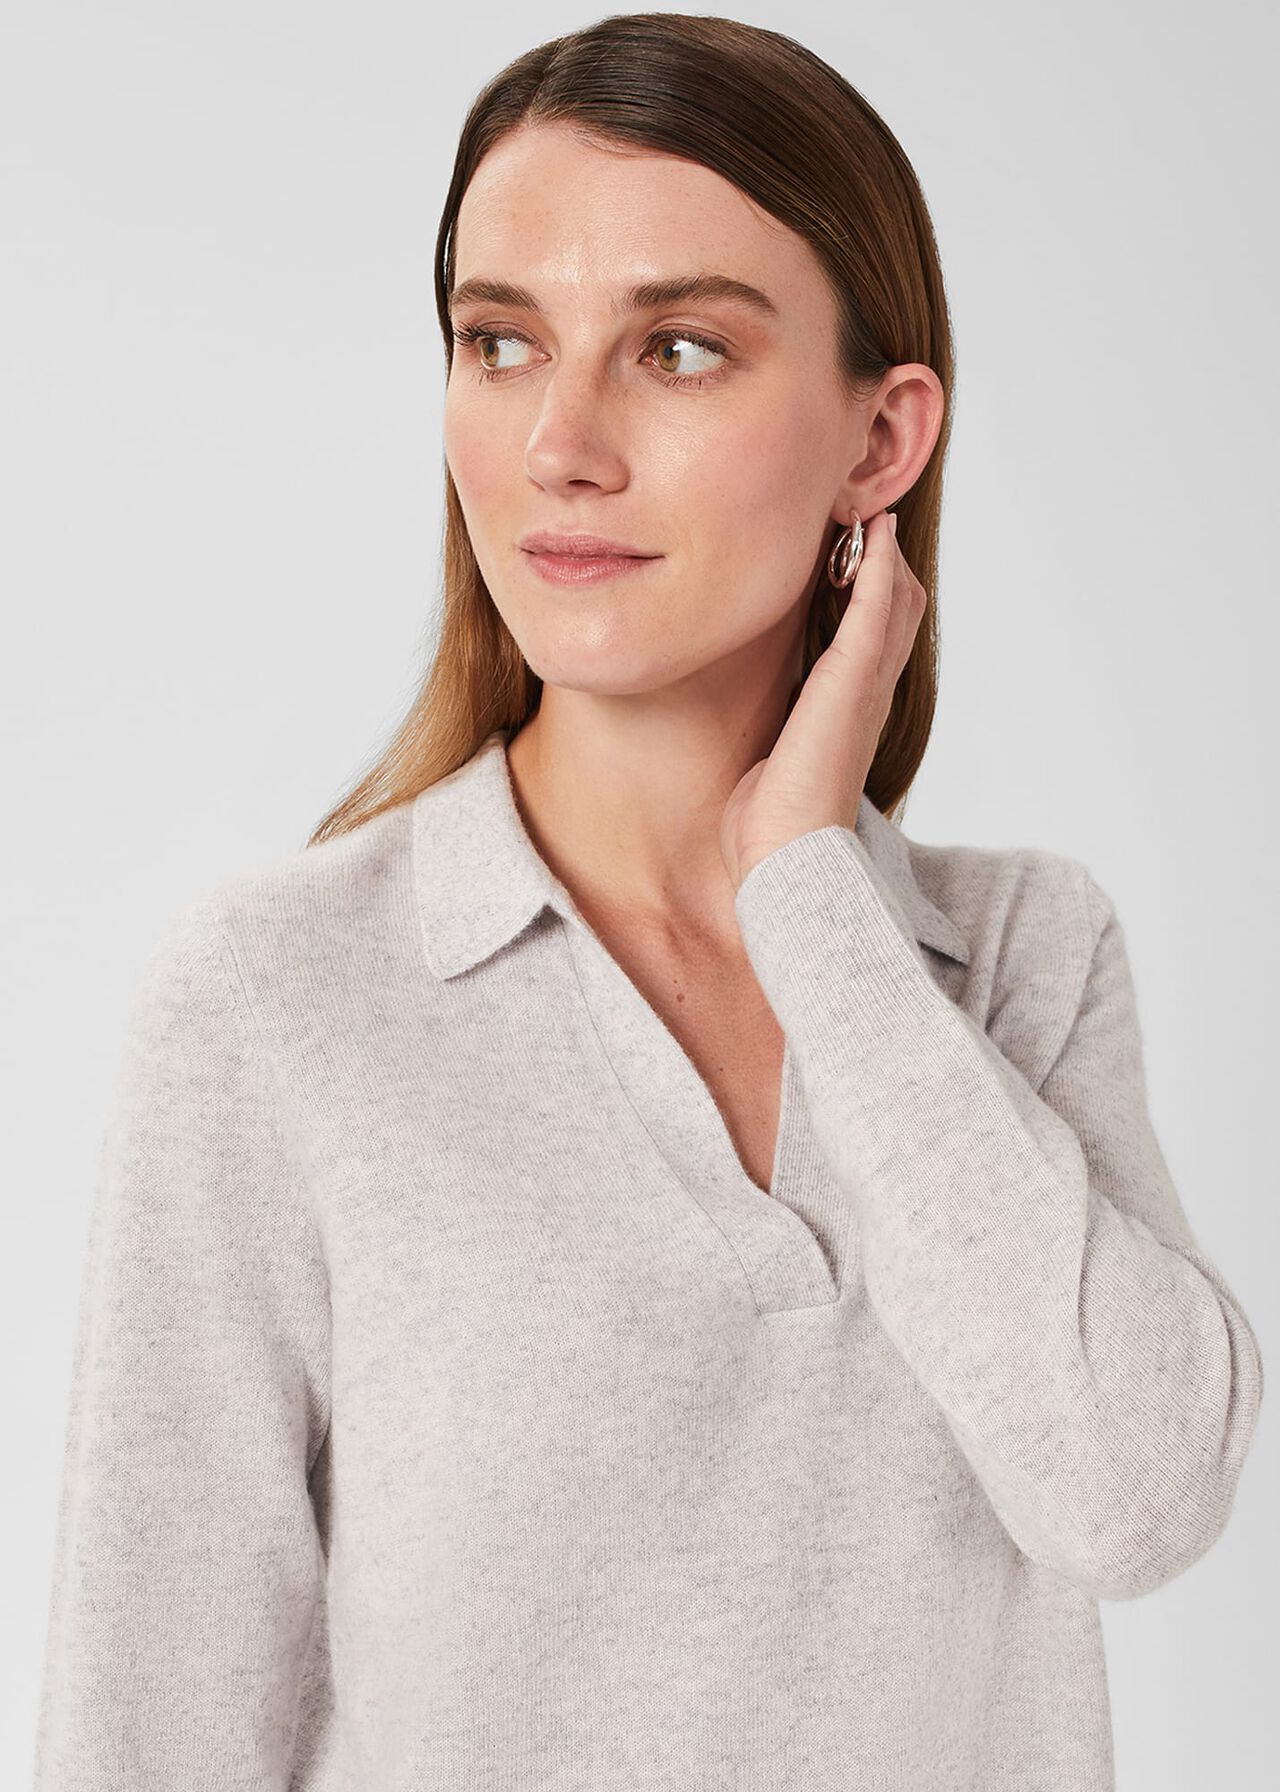 Cashmere Kayla Collared Sweater, Pale Grey Marl, hi-res